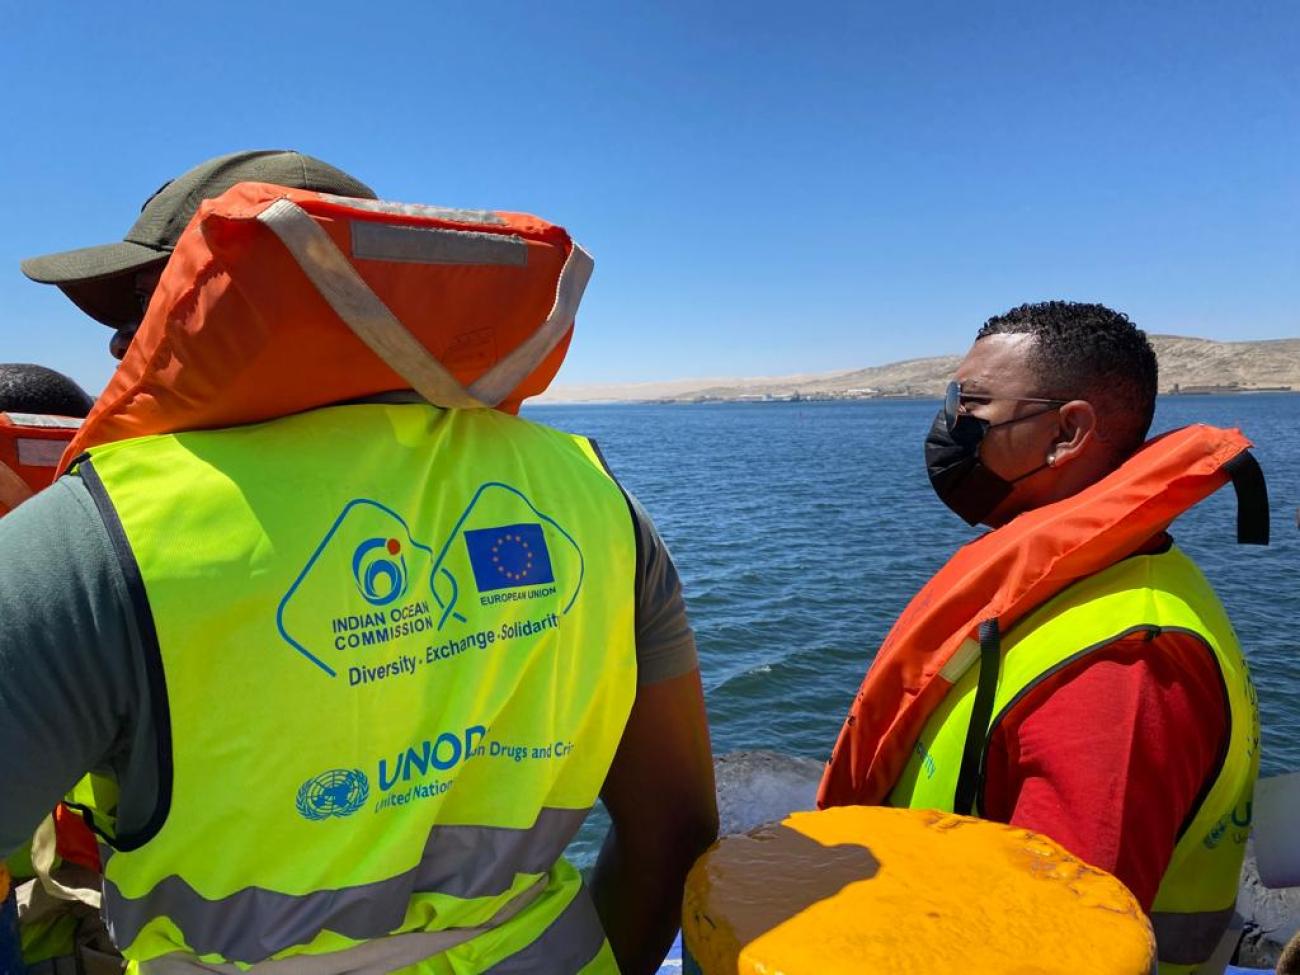 Image shows two men in hi-vis and life jackets on a boat looking out to sea